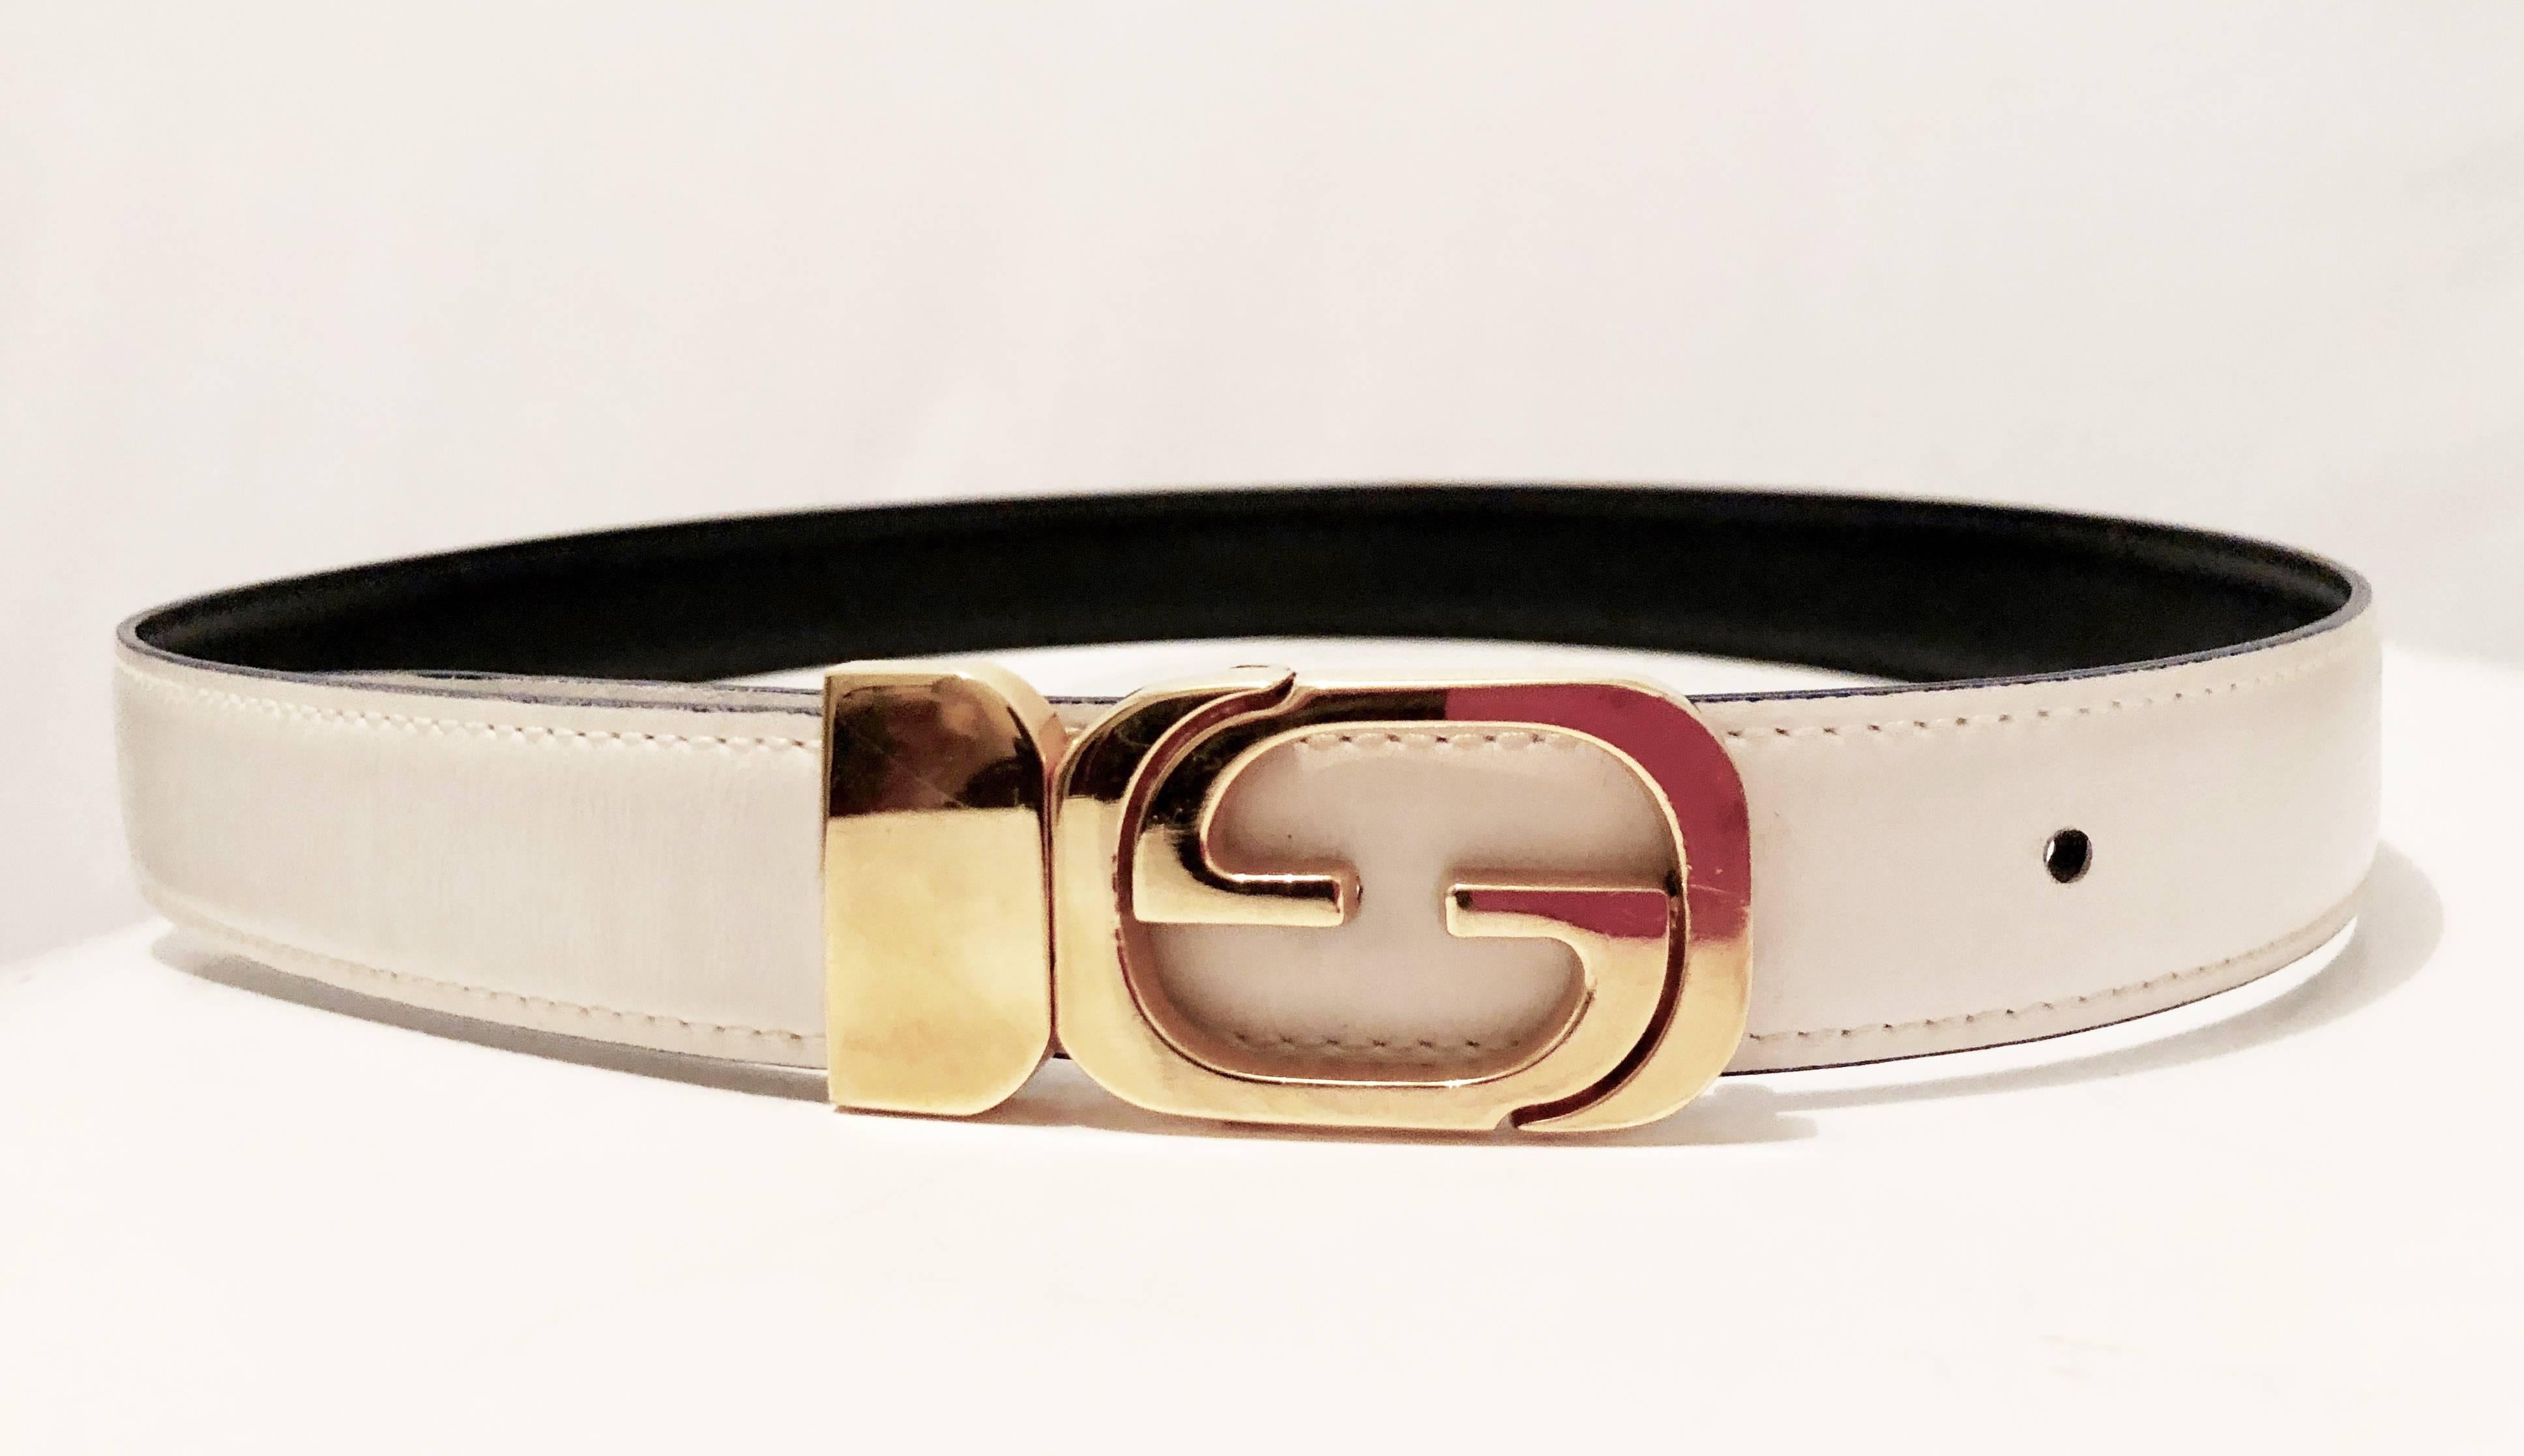 This vintage Gucci belt features a reversible buckle, enabling one to wear either the black leather or white leather side.  In good preowned condition with some signs of prior wear including a few light scratches to the buckle and some light rubs to